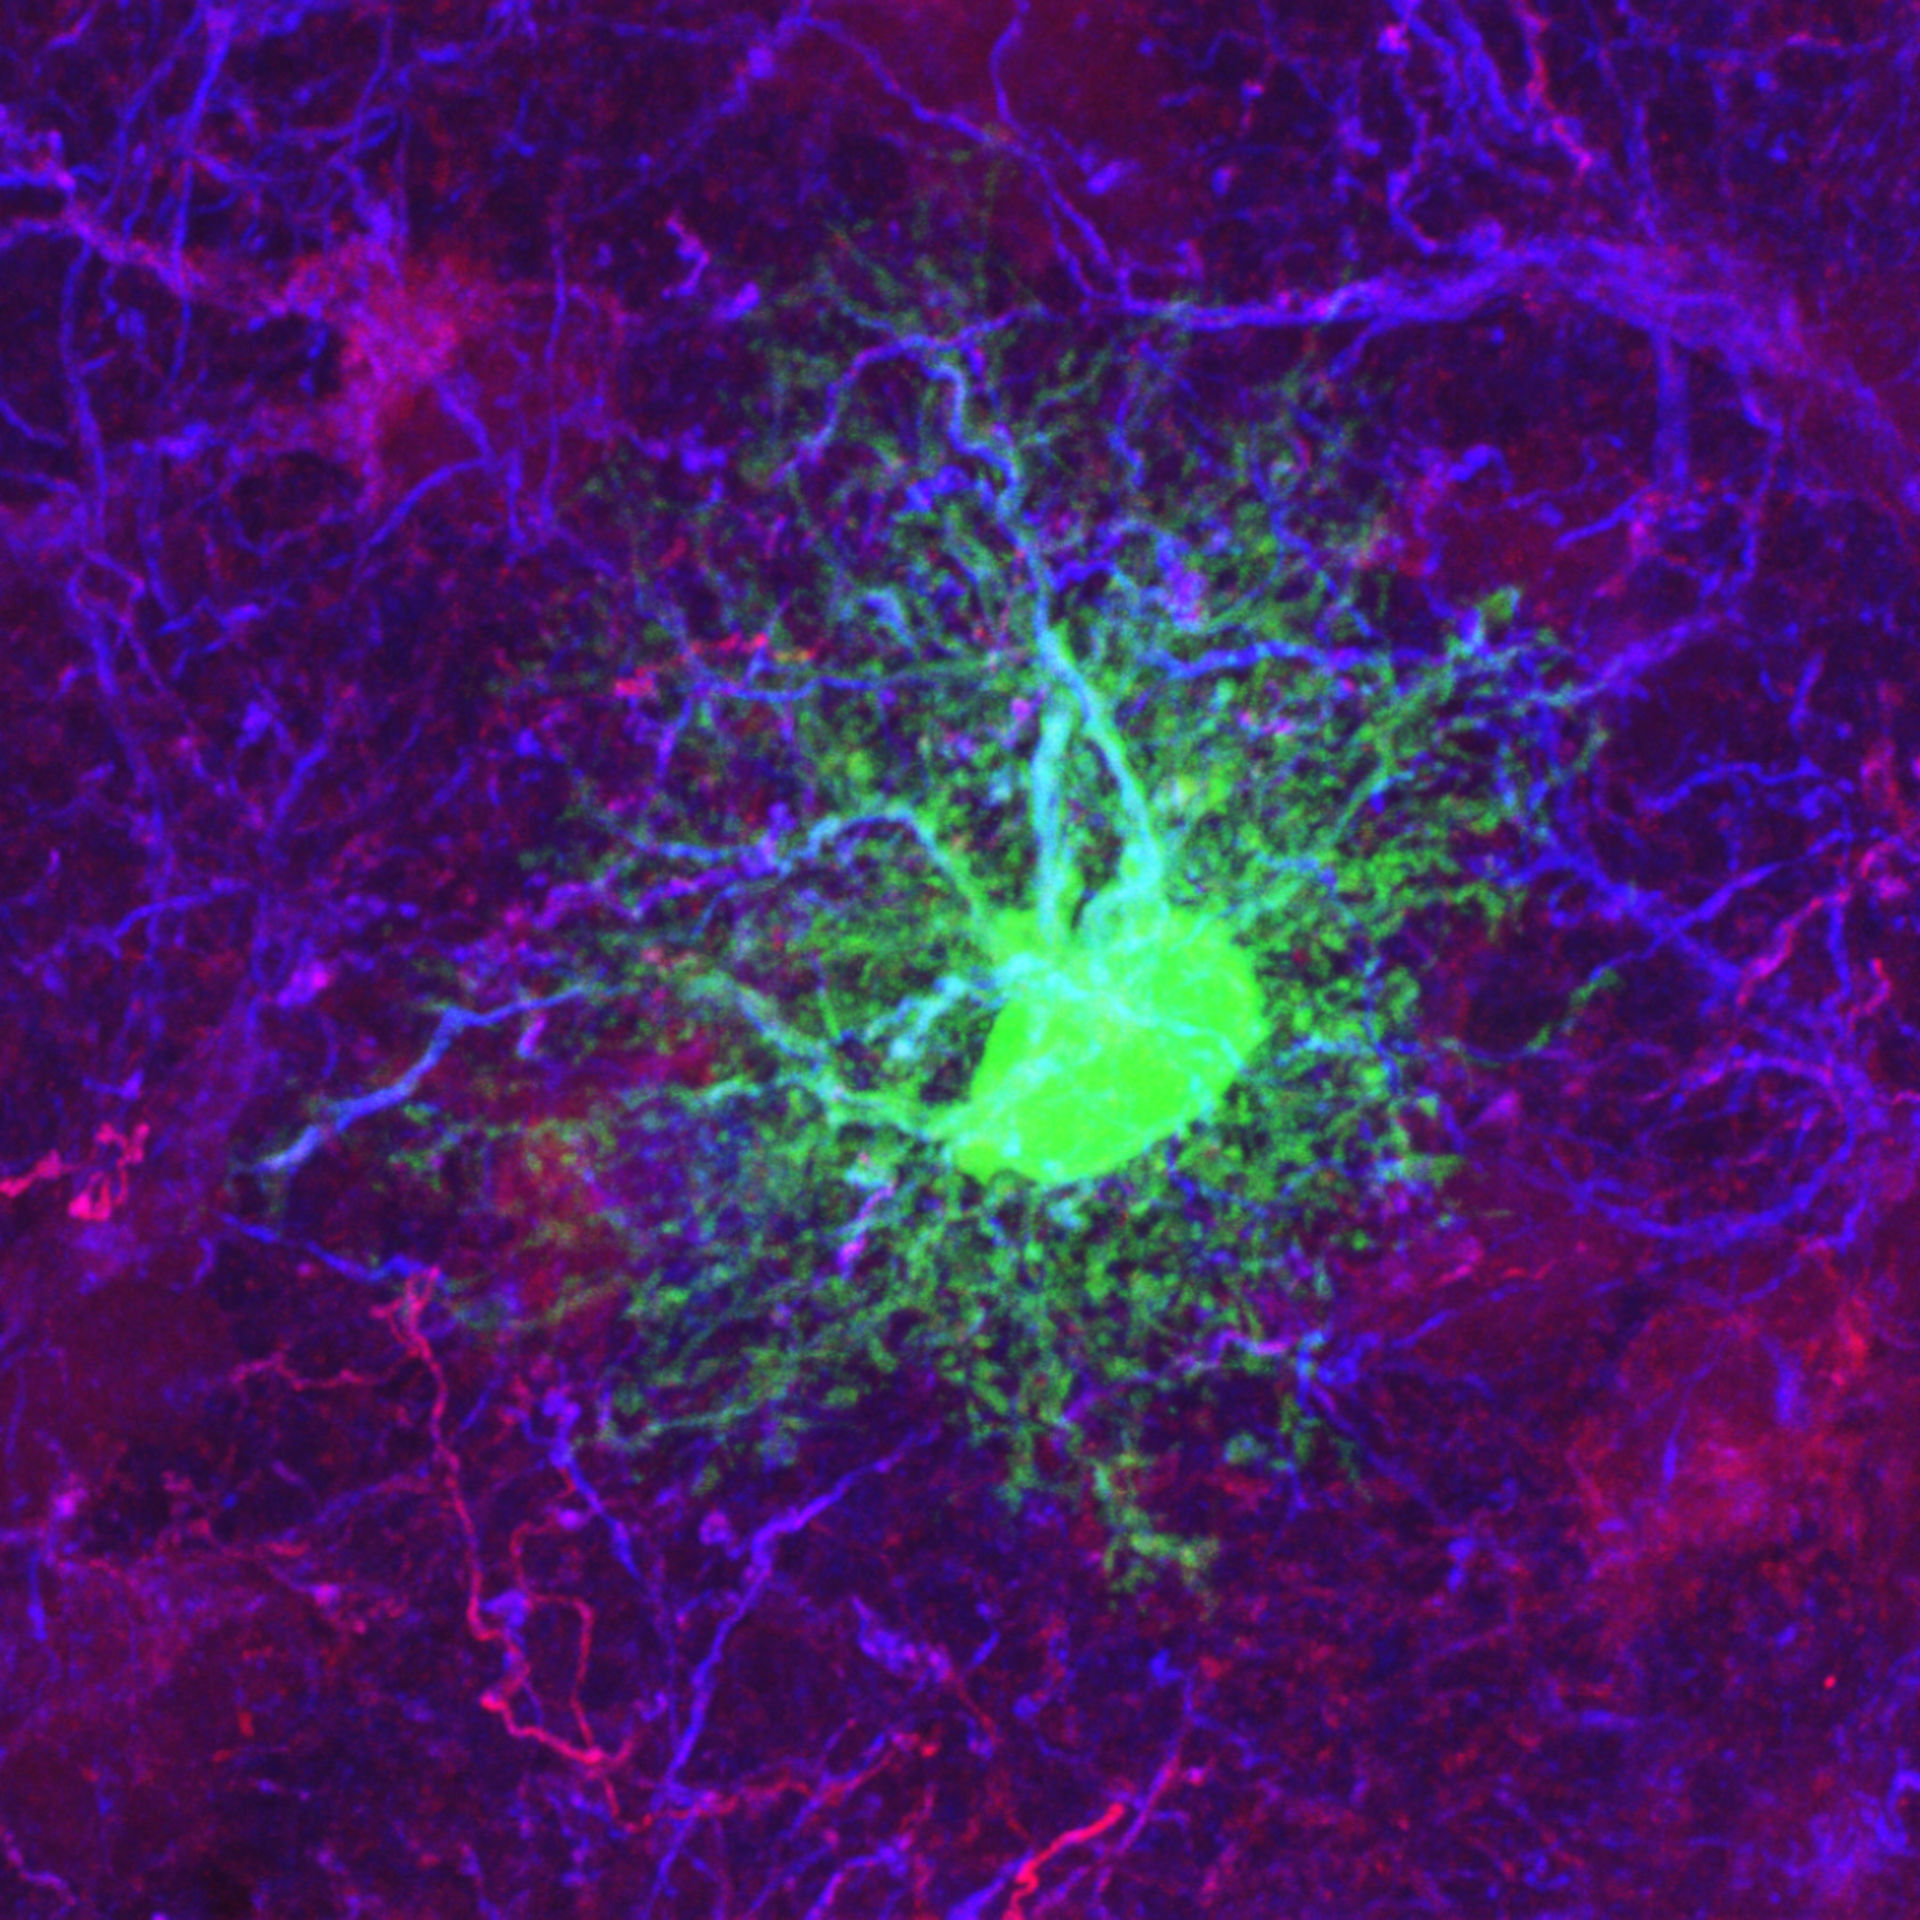 Image of the Week - December 15, 2014 - CIL:36428